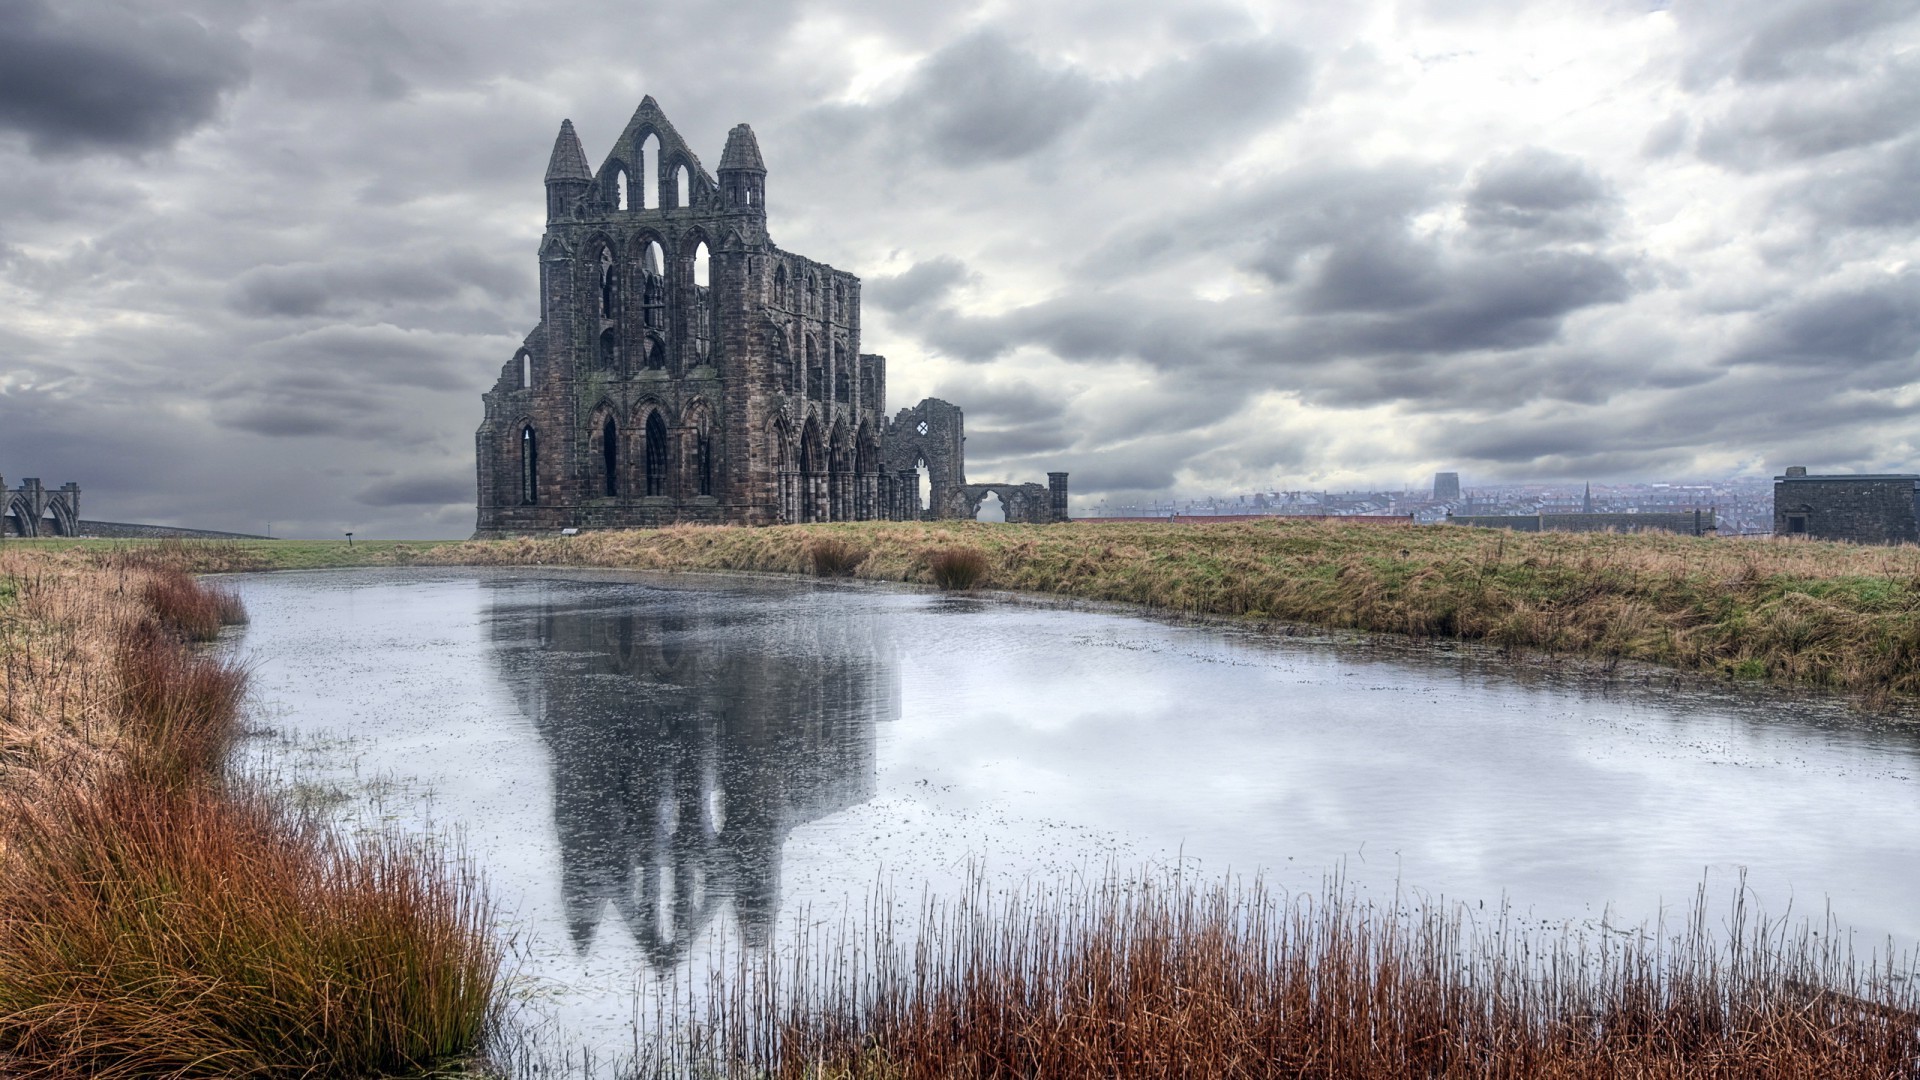 church, Ruin, Scotland, UK, Reflection, Overcast, Clouds, Cathedral